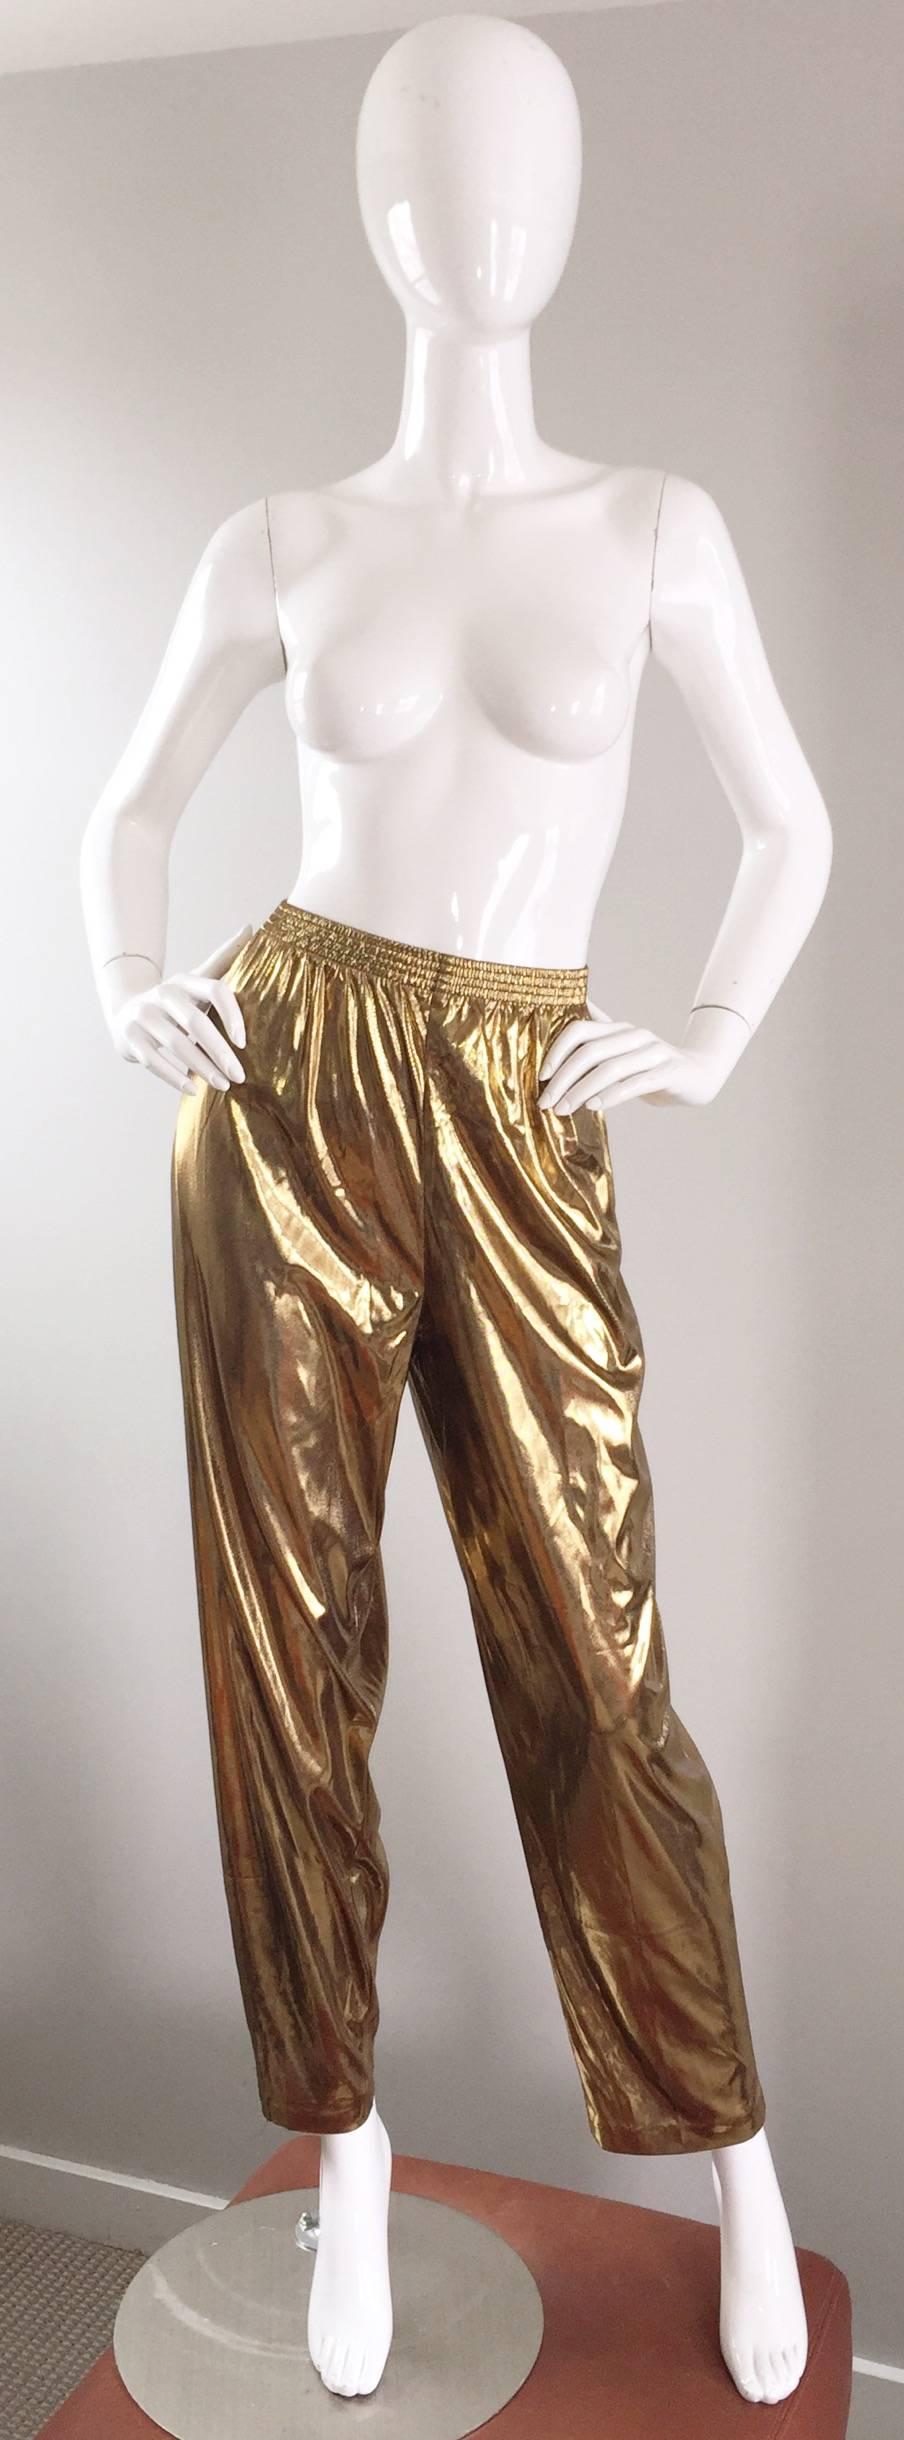 Fantastic vintage gold lame Lori of California trousers! What else can I say besides AWESOME?!? Brand new with original tags. Features an elastic waistband to accommodate an array of sizes. Pockets at both sides of the waist. Can easily be dressed